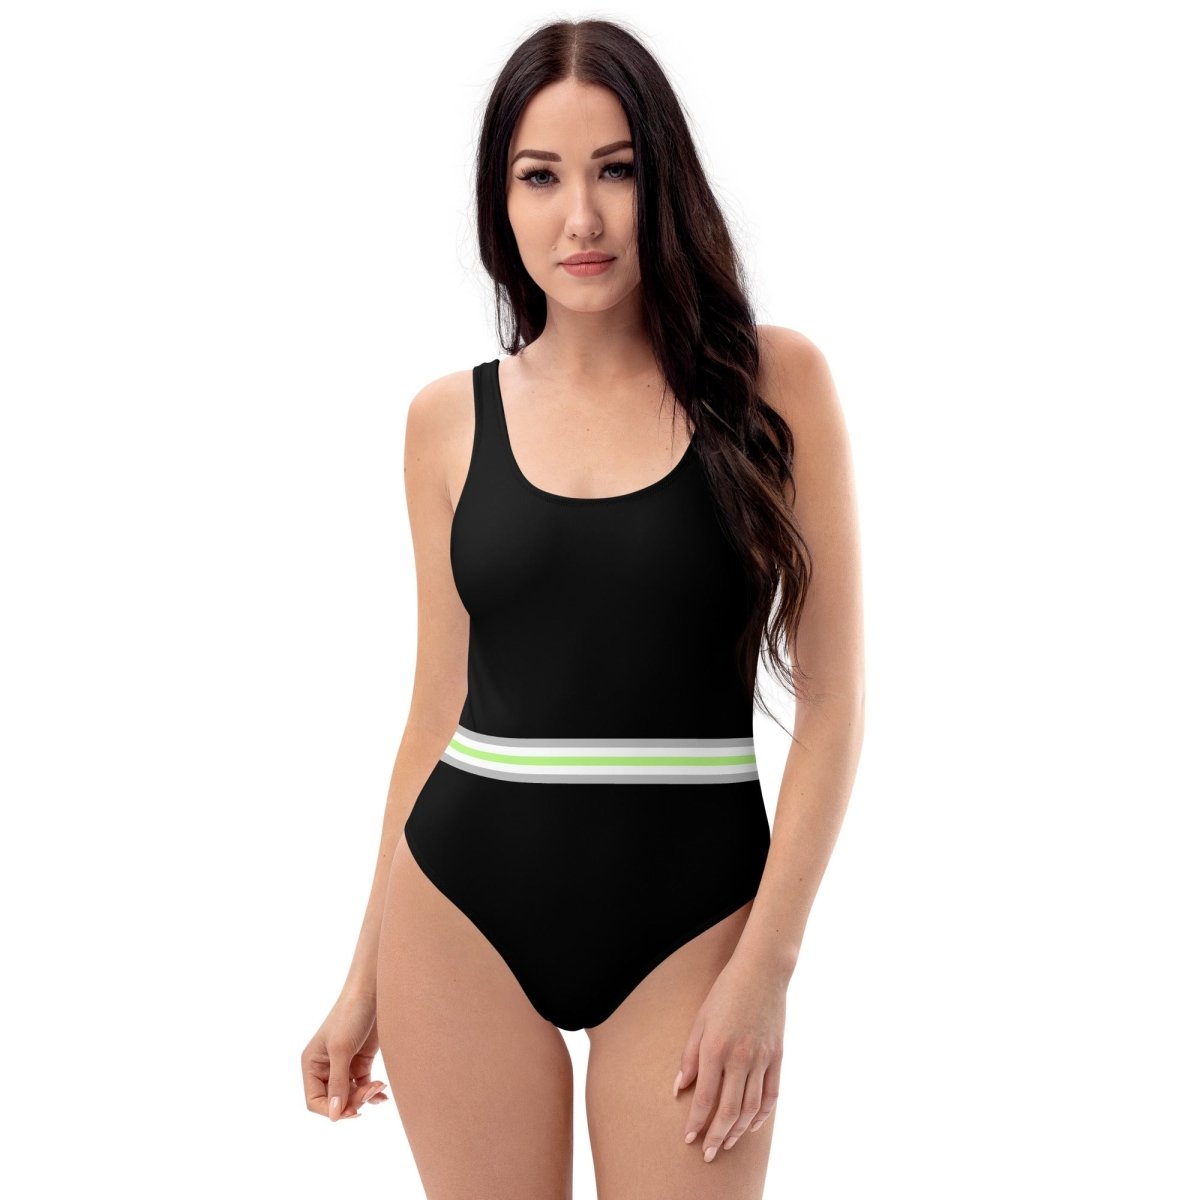 Agender Stripe One-Piece Swimsuit - On Trend Shirts